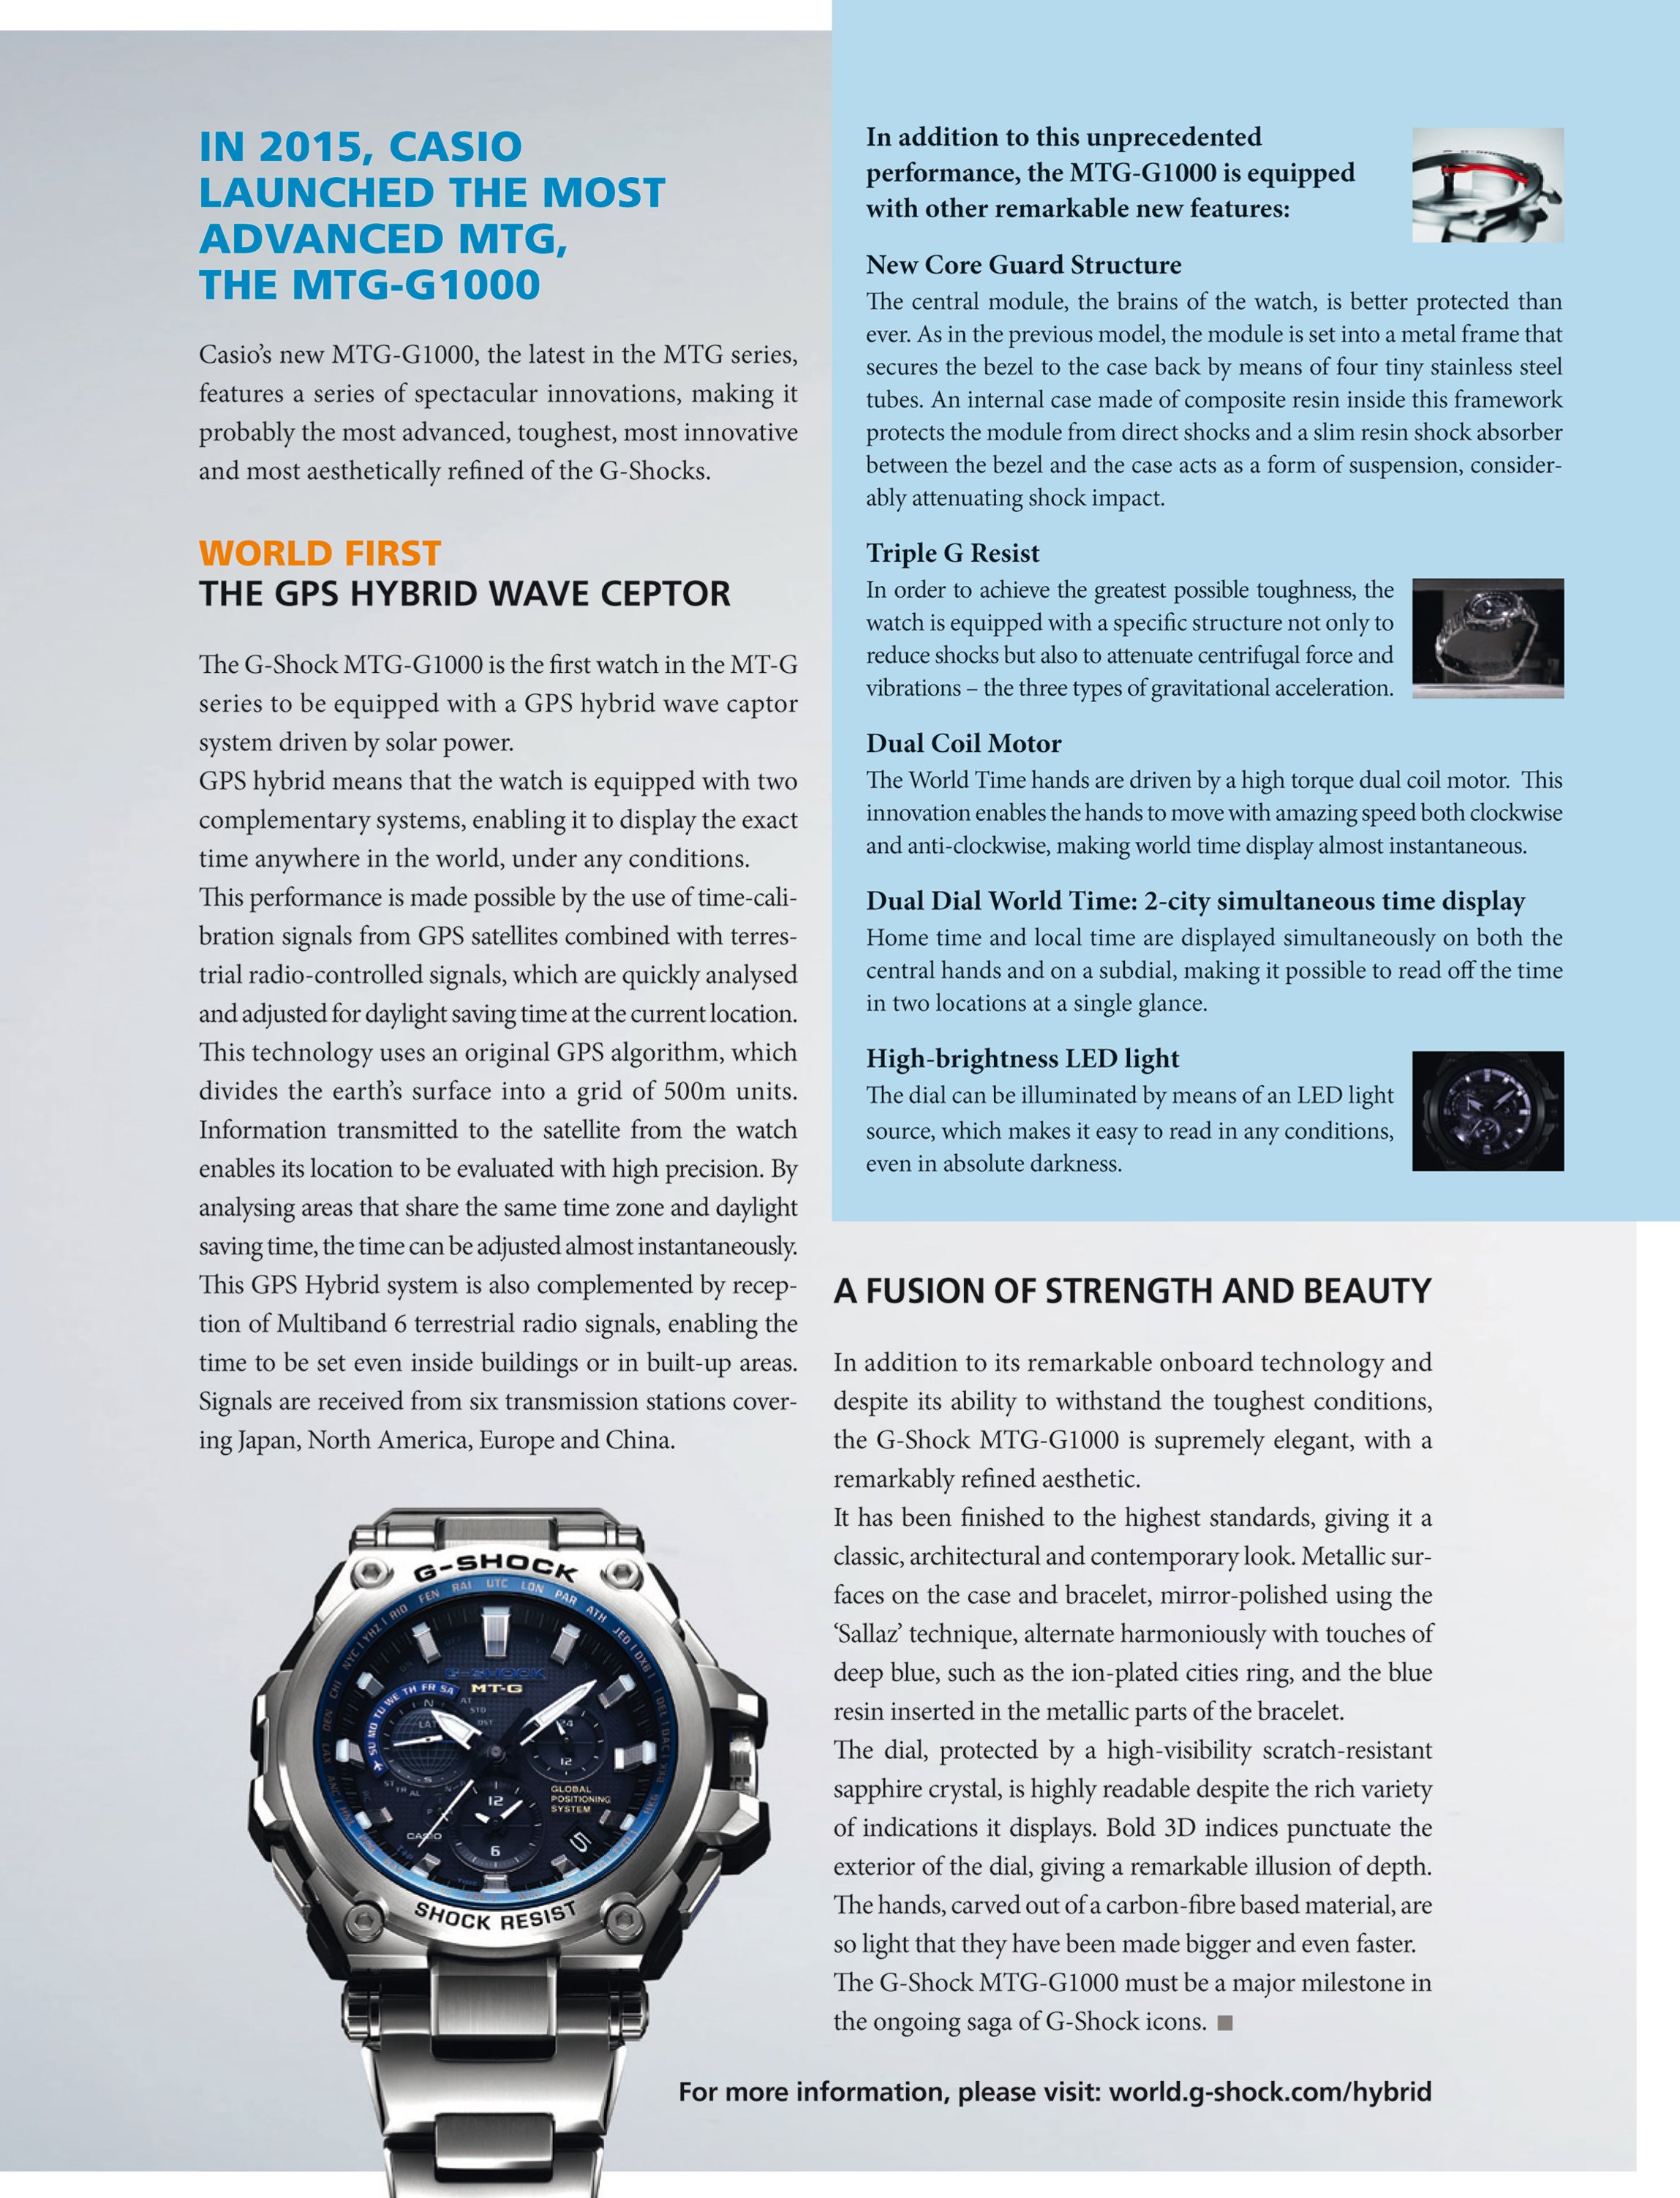 G-SHOCK MTG - G1000: unparalleled performance combined with (...)